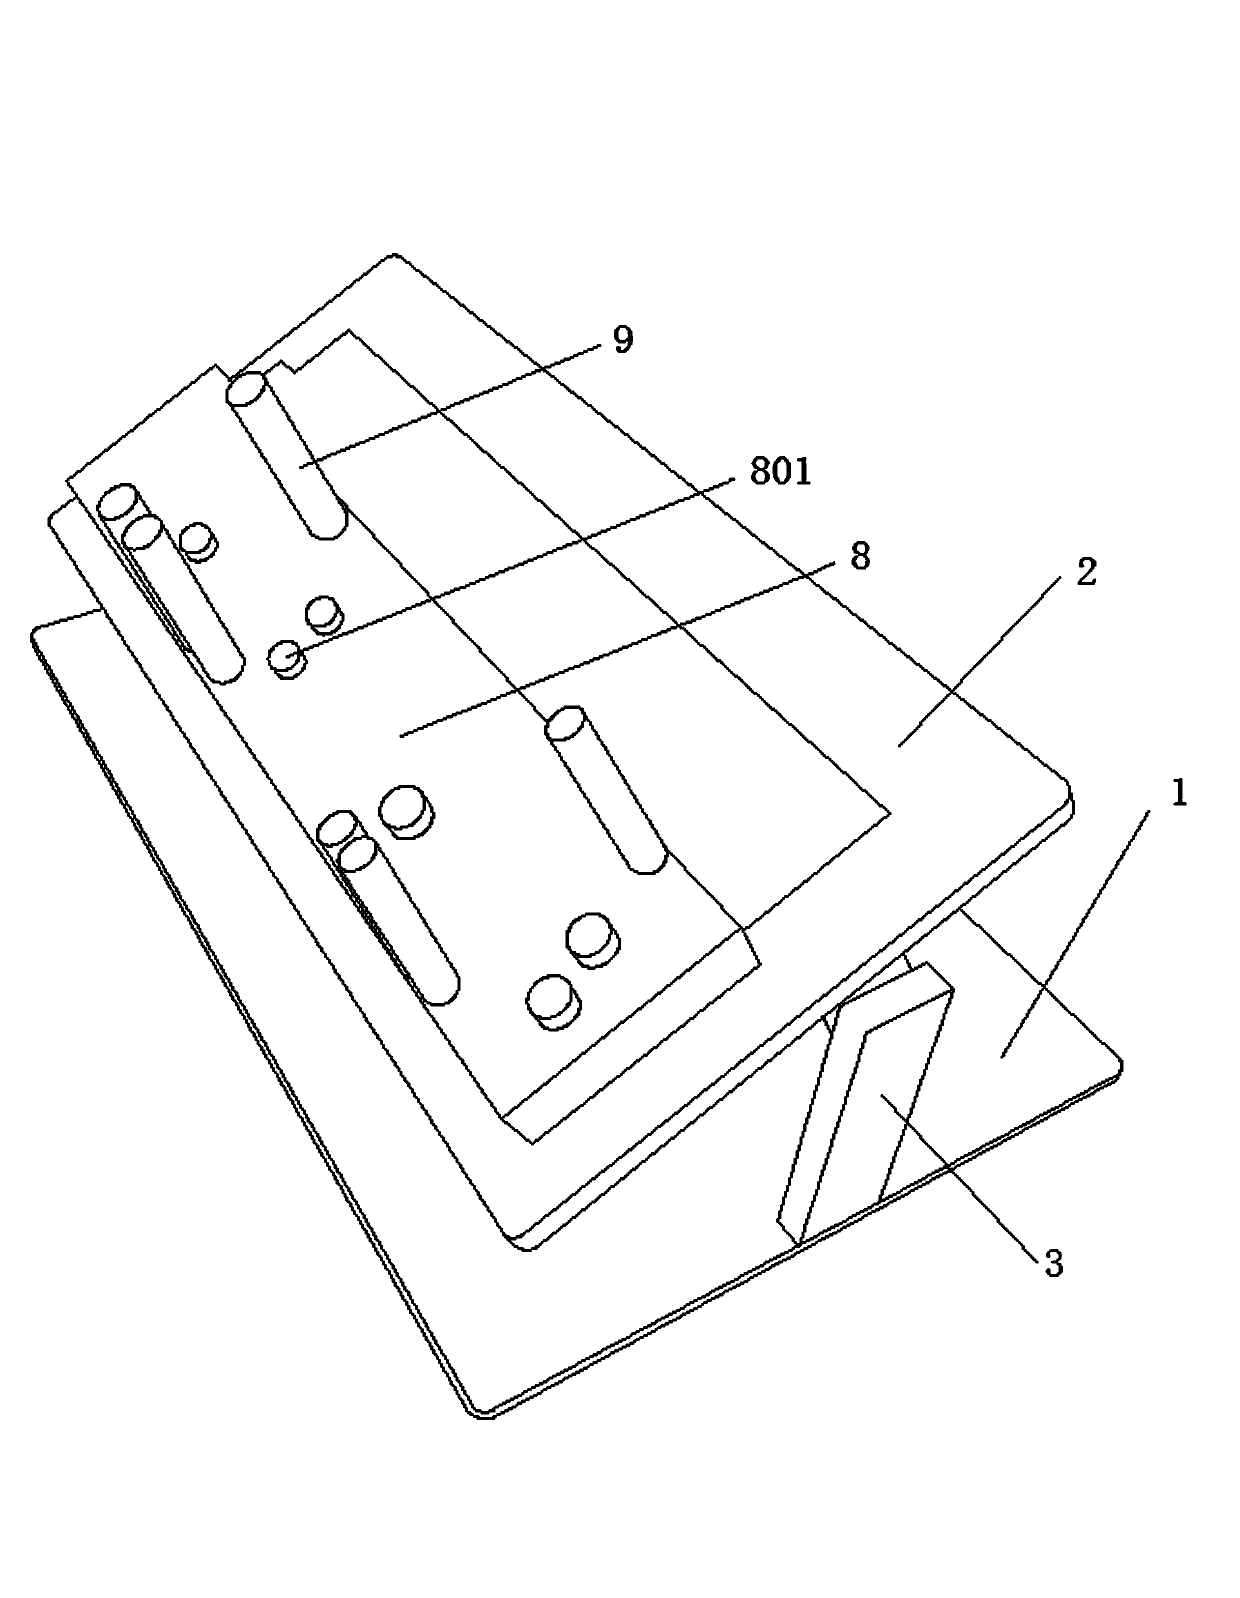 Bearing fixture used for assisting in PCB (printed-circuit board) processing